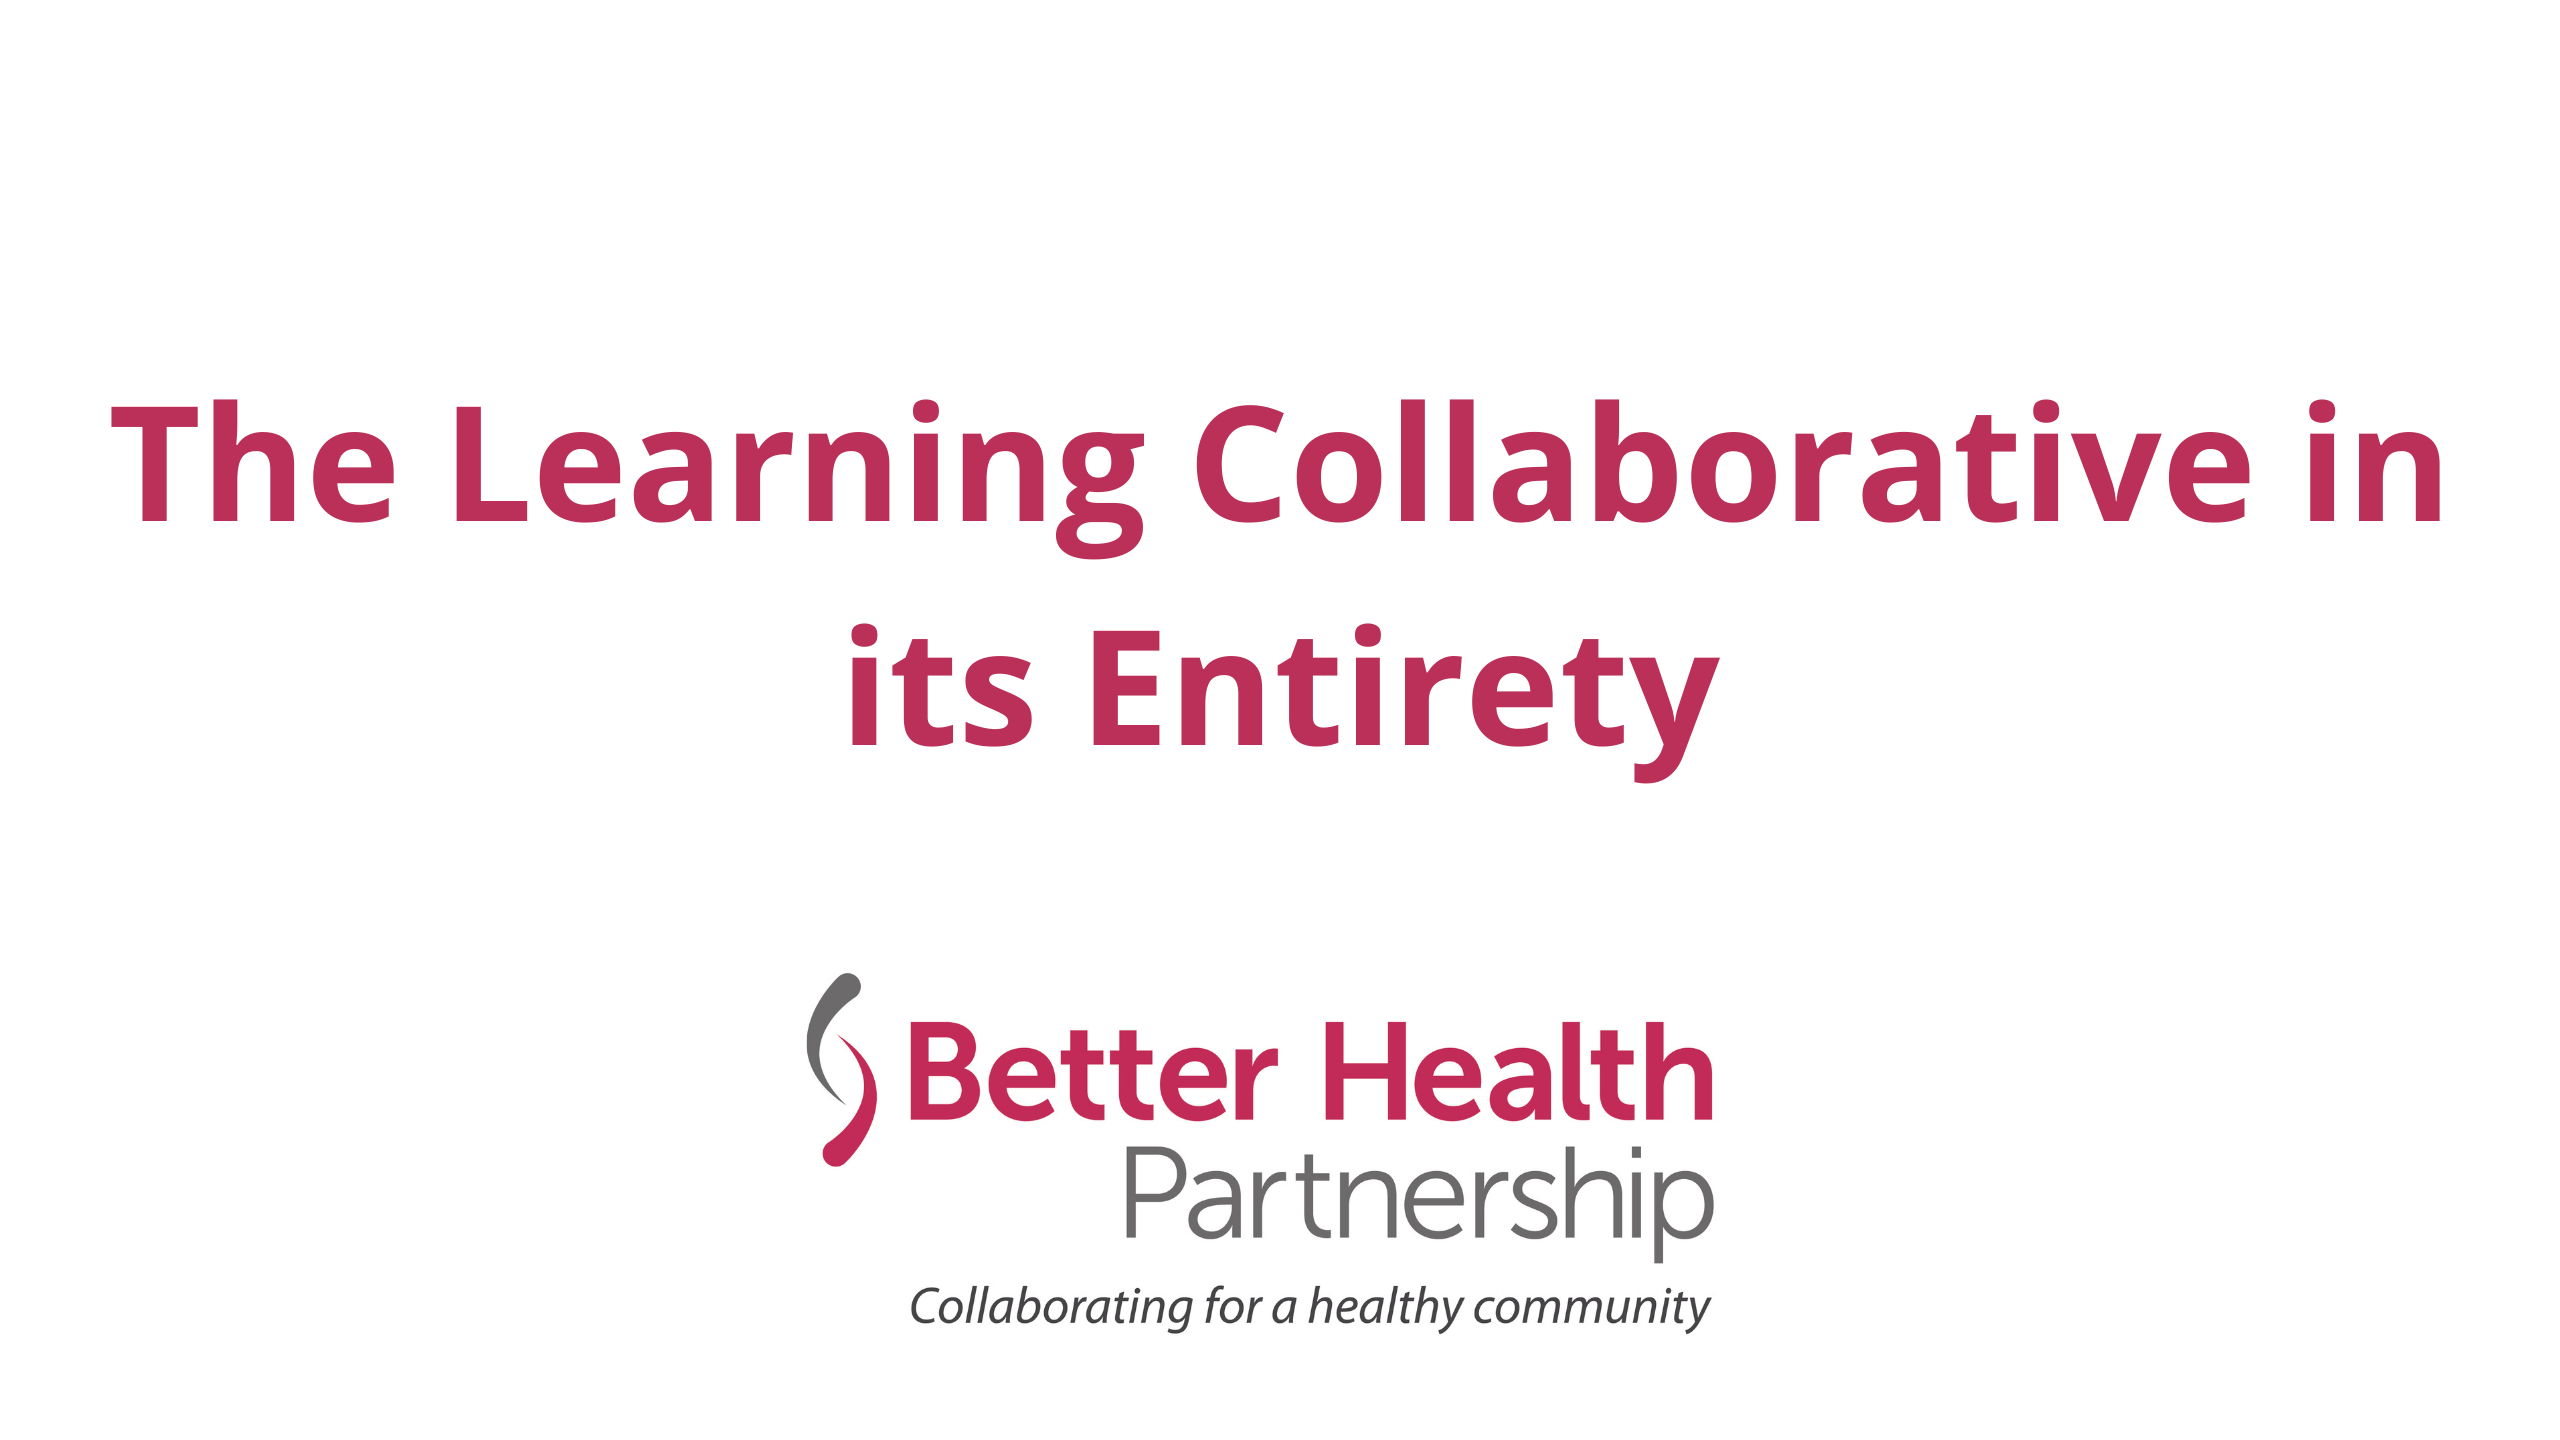 The Learning Collaborative in its Entirety